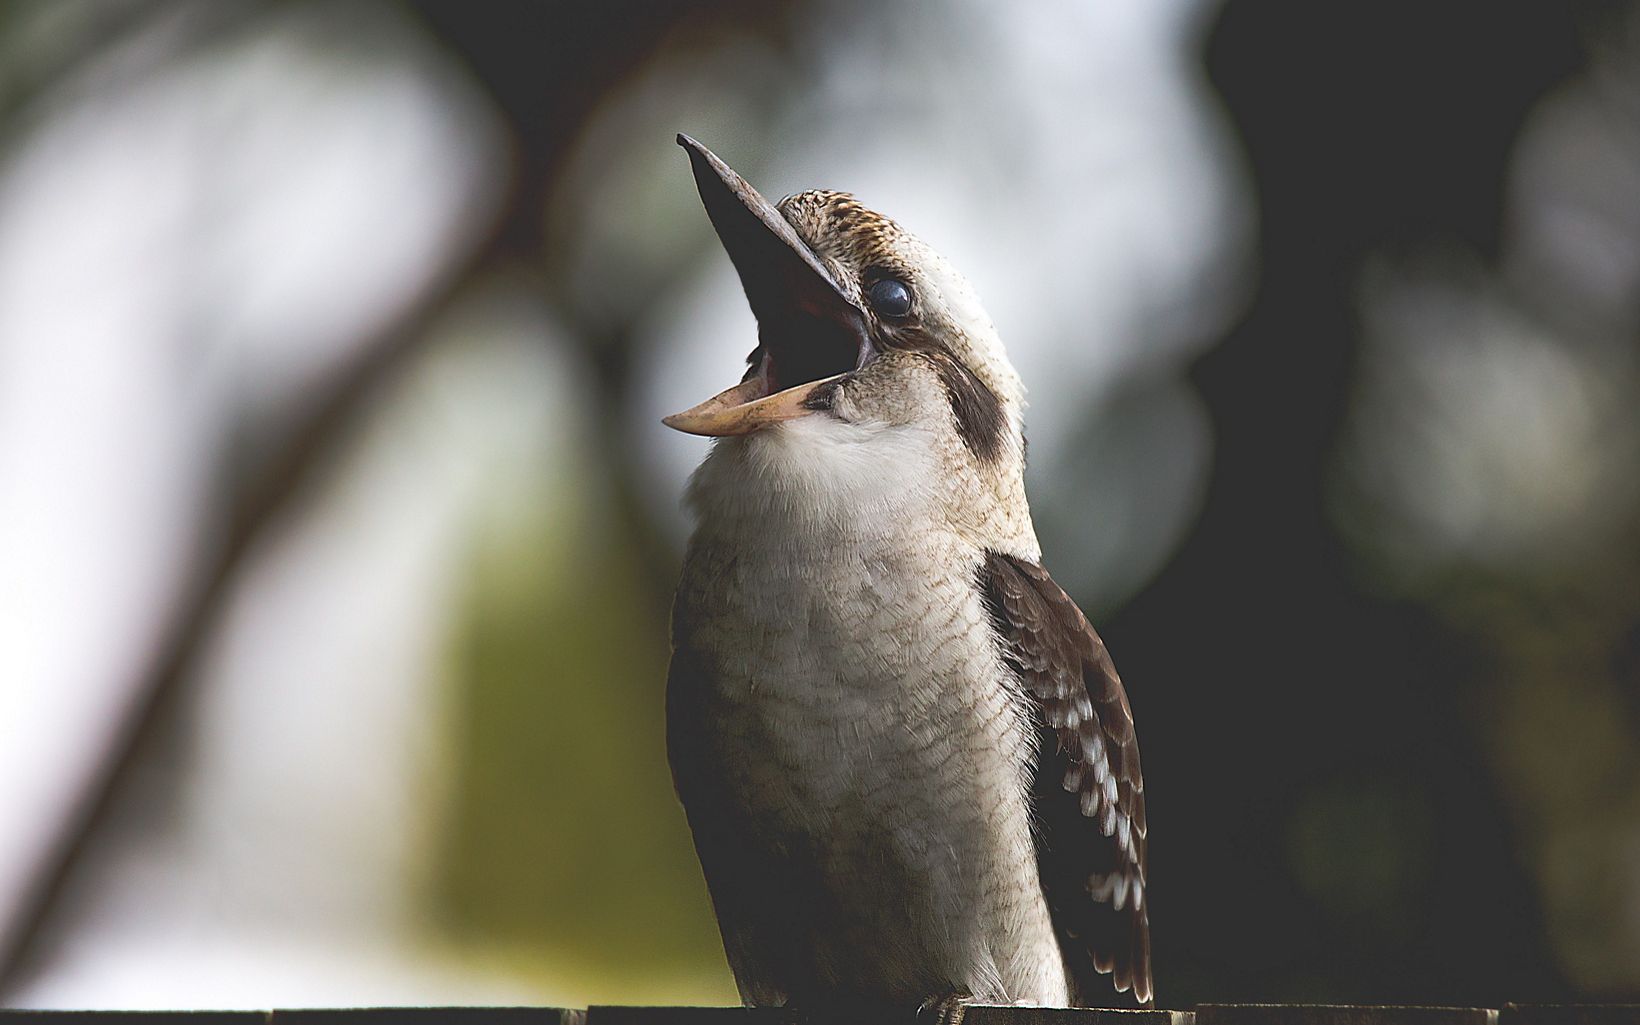 Kookaburras are the largest members of the kingfisher family